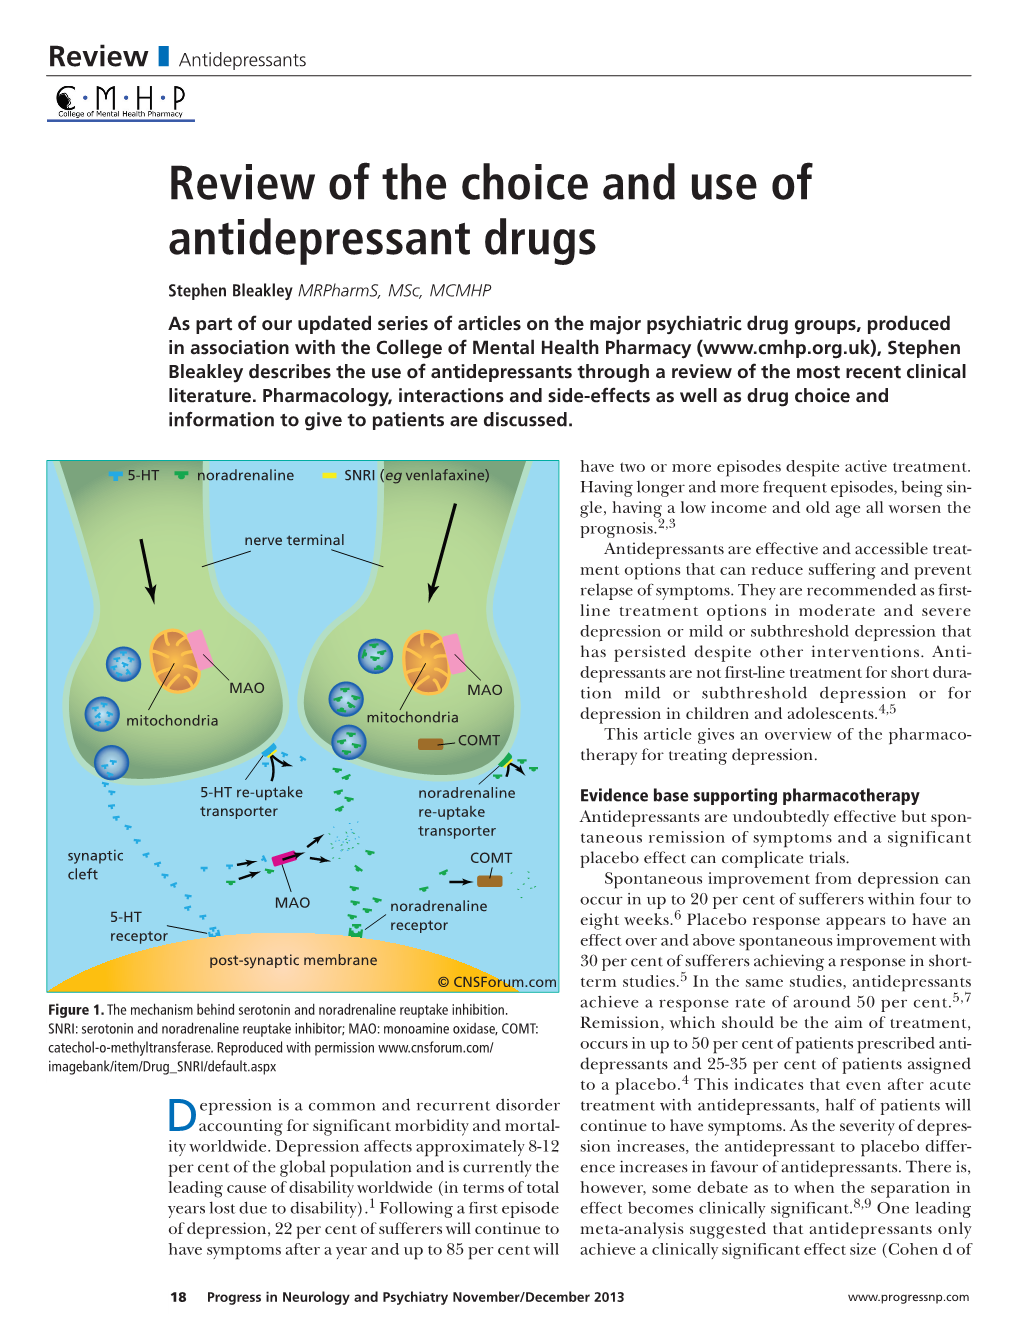 Review of the Choice and Use of Antidepressant Drugs